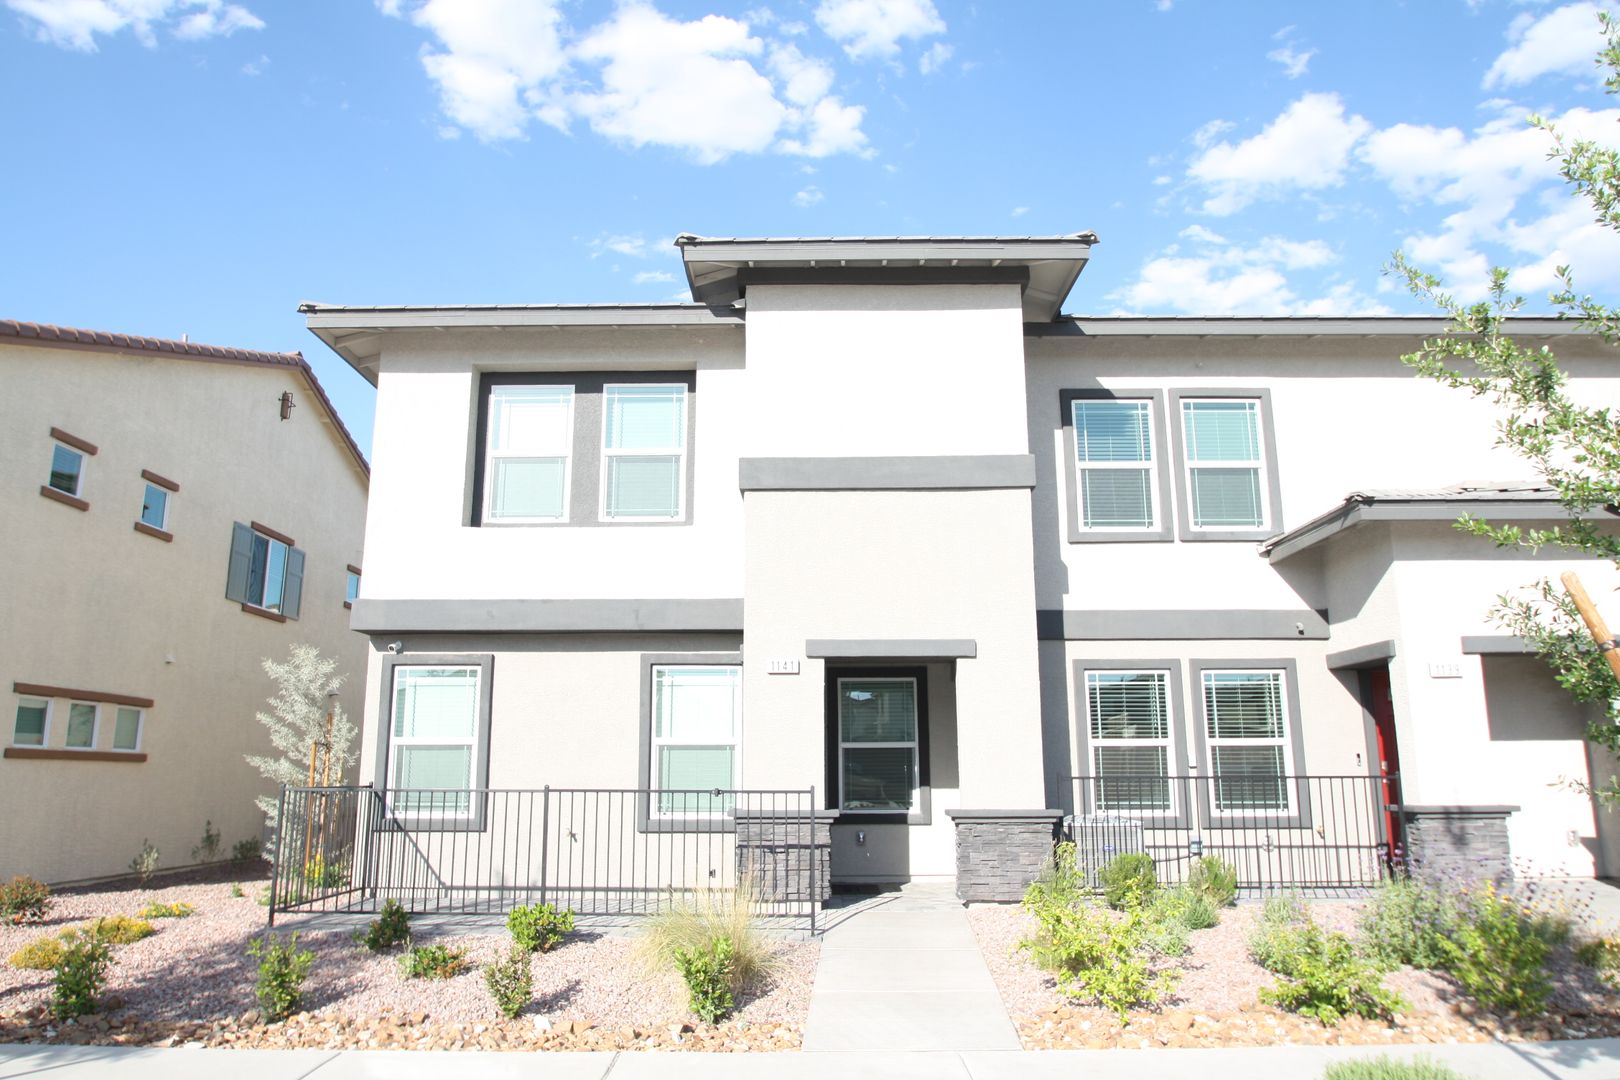 BRAND NEW 3BD/2.5BA TOWNHOME IN CADENCE! W/ TONS OF AMENITIES!